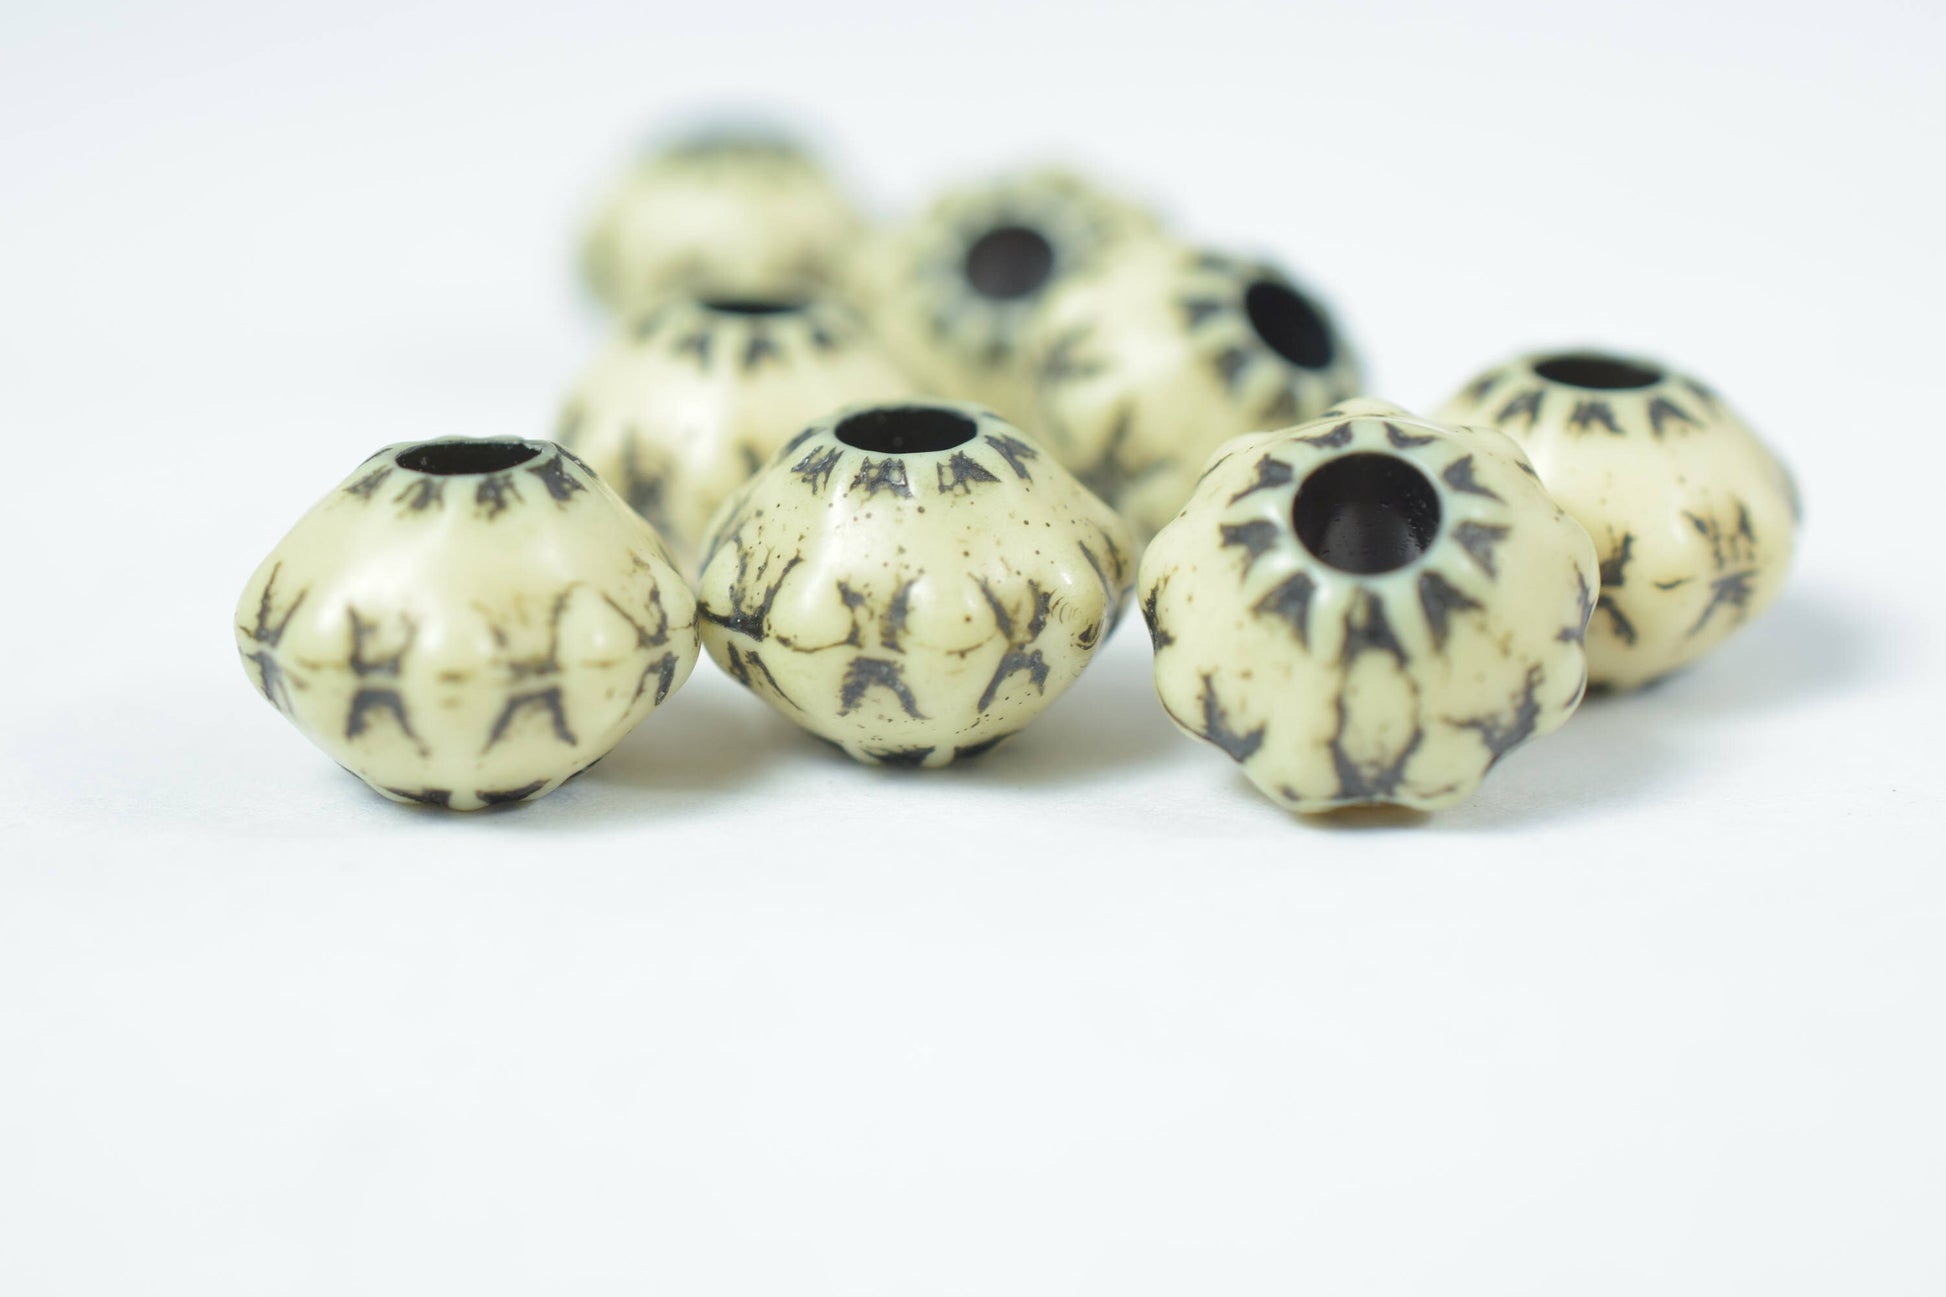 13mm Saucer Acrylic Beads Etched Rondelles Beads /Vintage Style Spacer Beads/Black/ Ivory/ Faceted Edges/Vintage Beads, Wholesale Beads